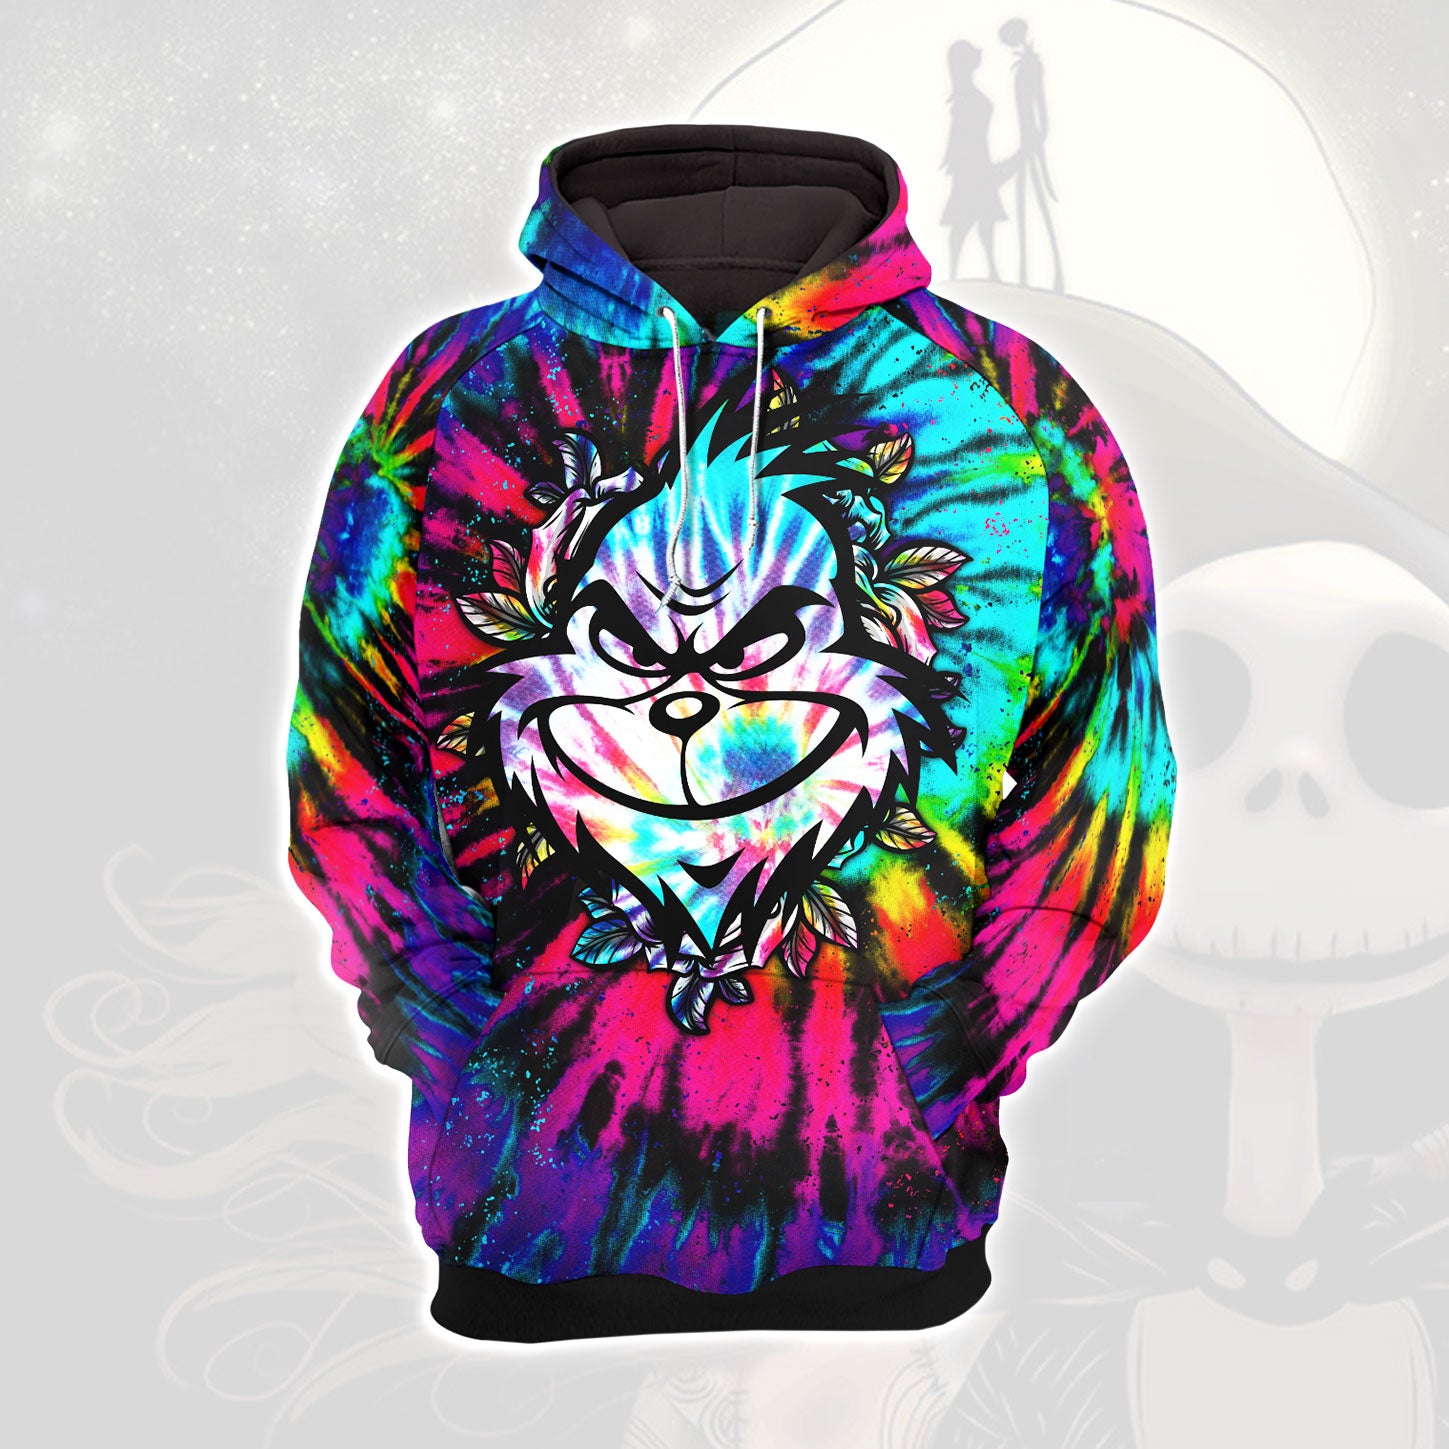 TieDye Rainbow Nightmare Theme Combo Hoodie and Leggings - Dark and edgy matching set with skull designs for a unique and stylish look